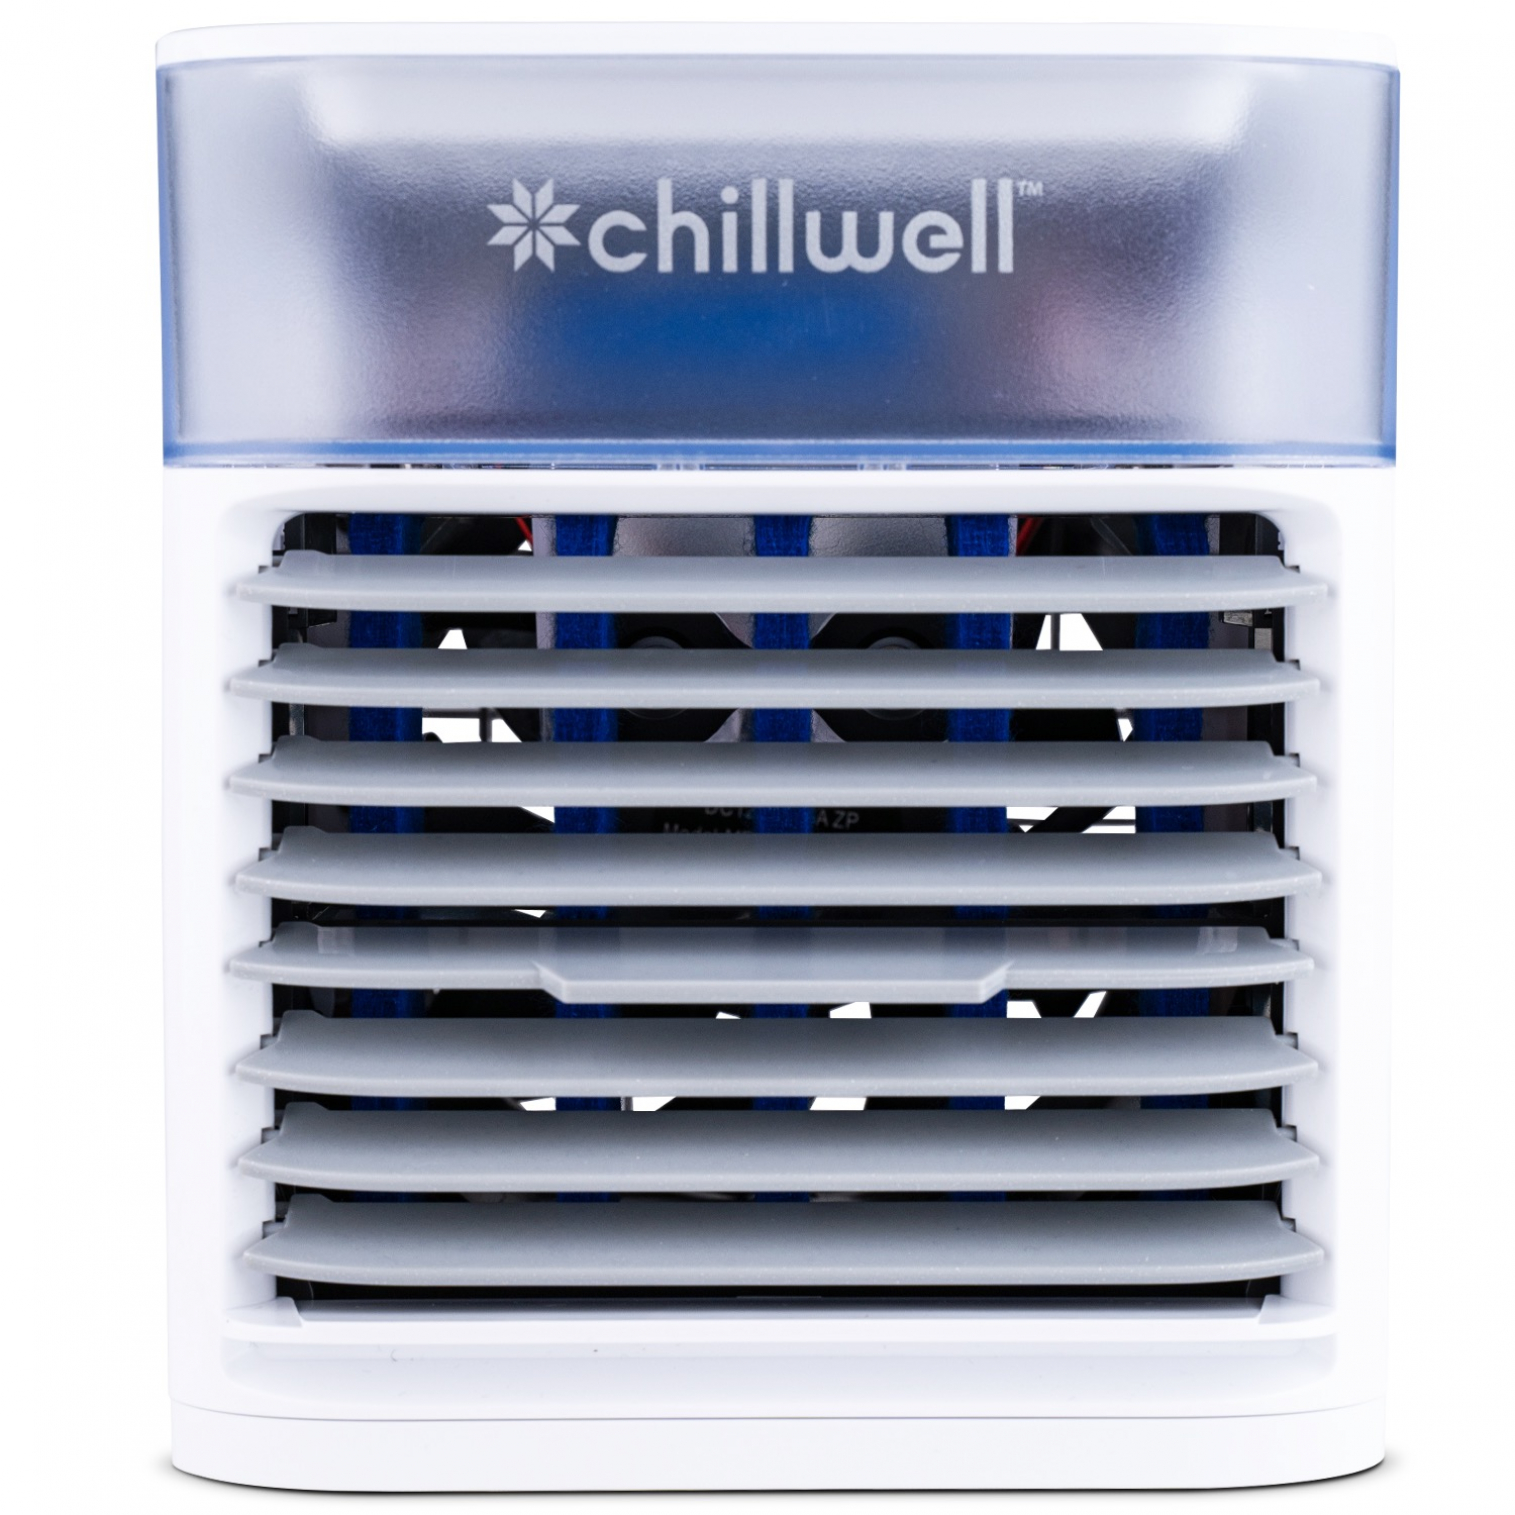 Chillwell AC Commercial Refrigerator